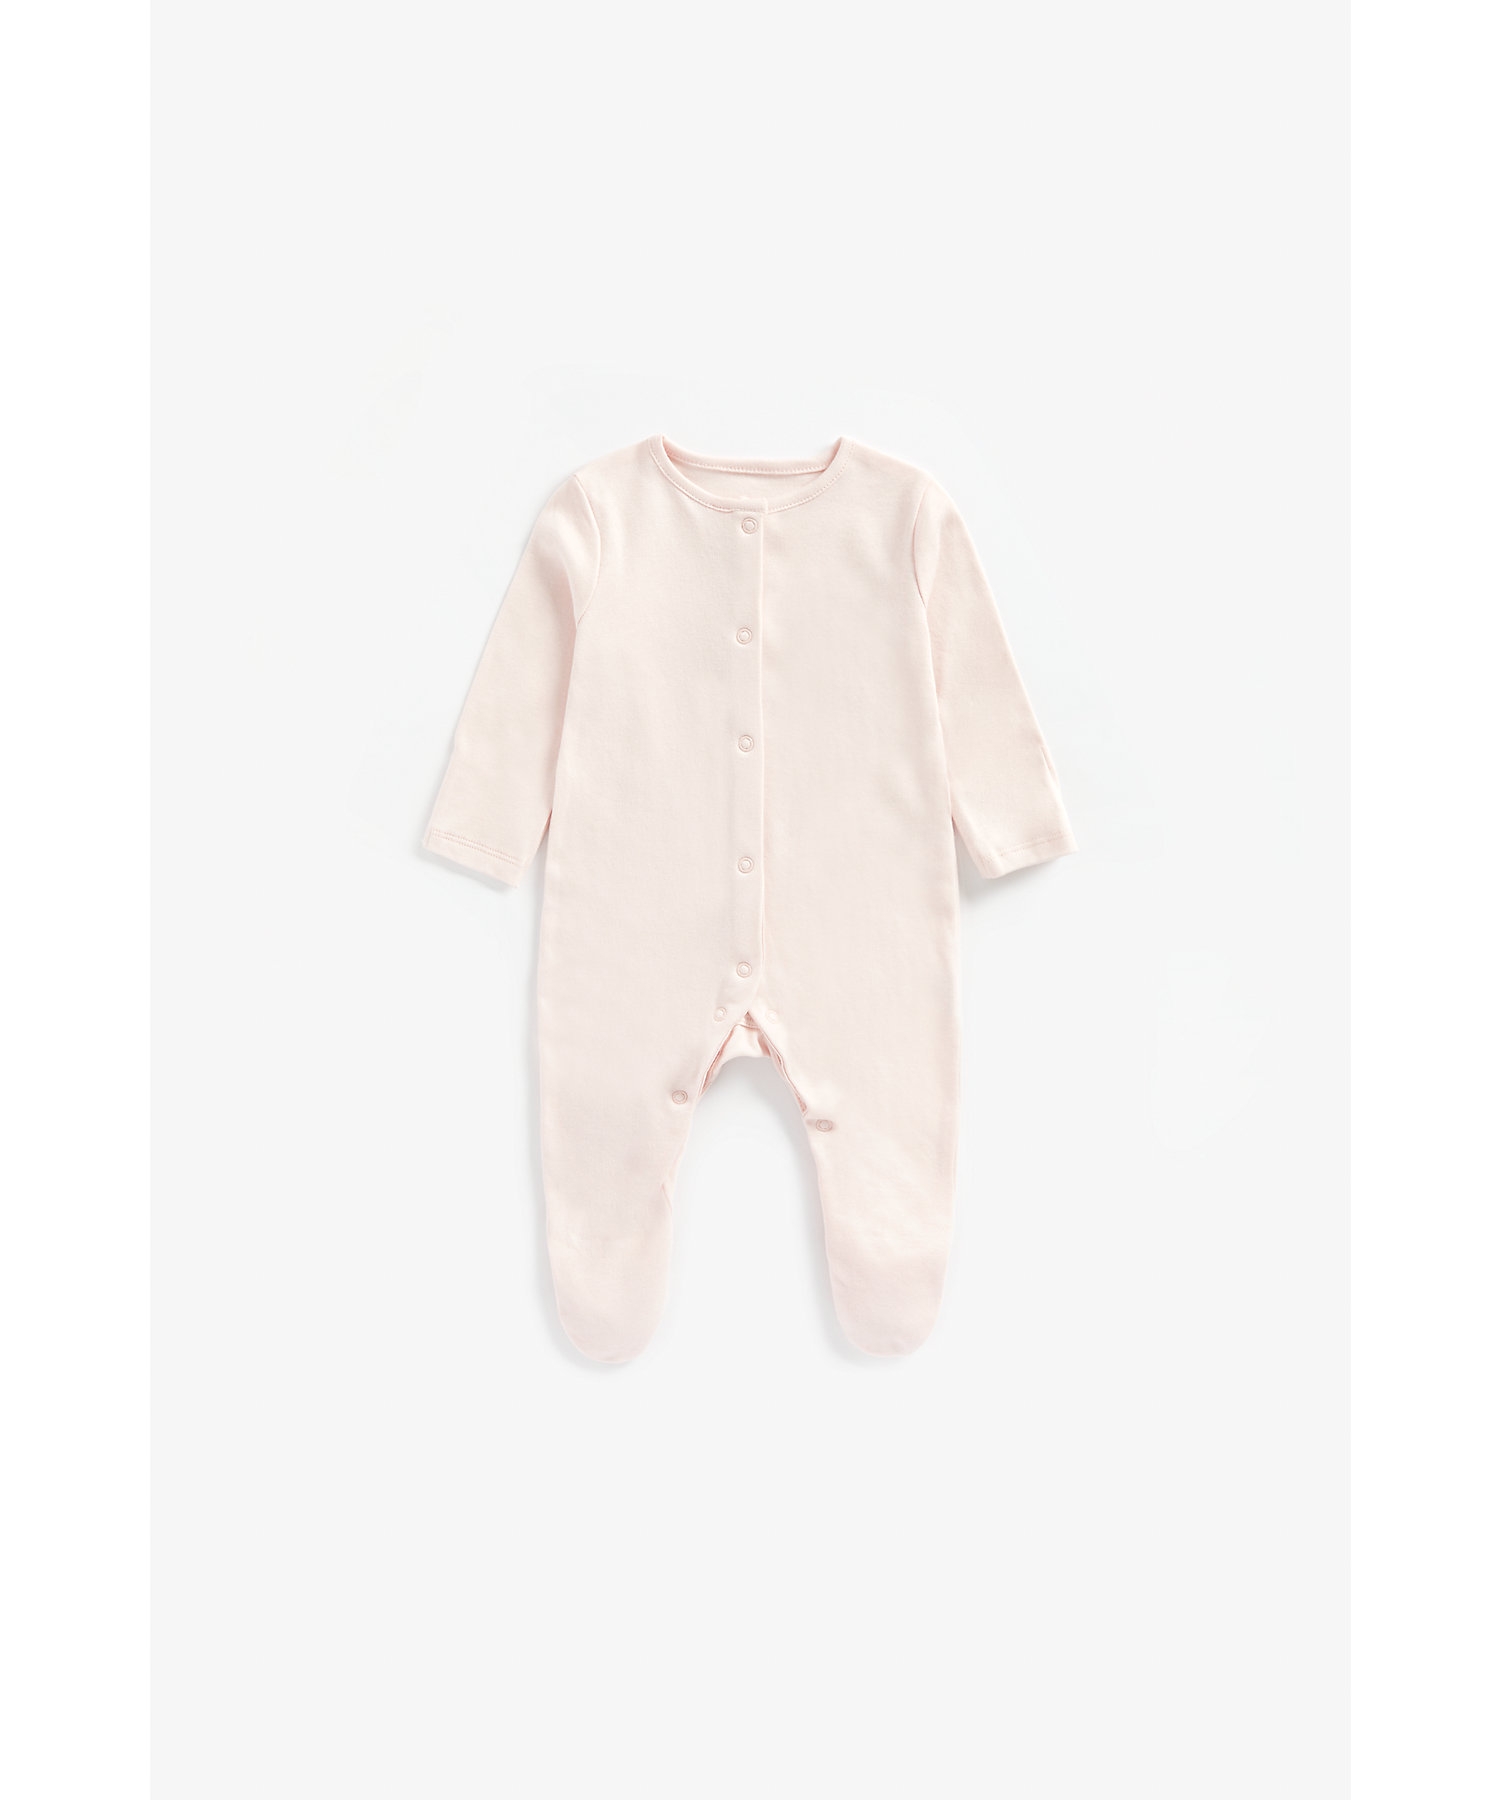 Mothercare | Girls Full Sleeves Sleepsuit Striped And Printed - Pack Of 3 - Pink 3